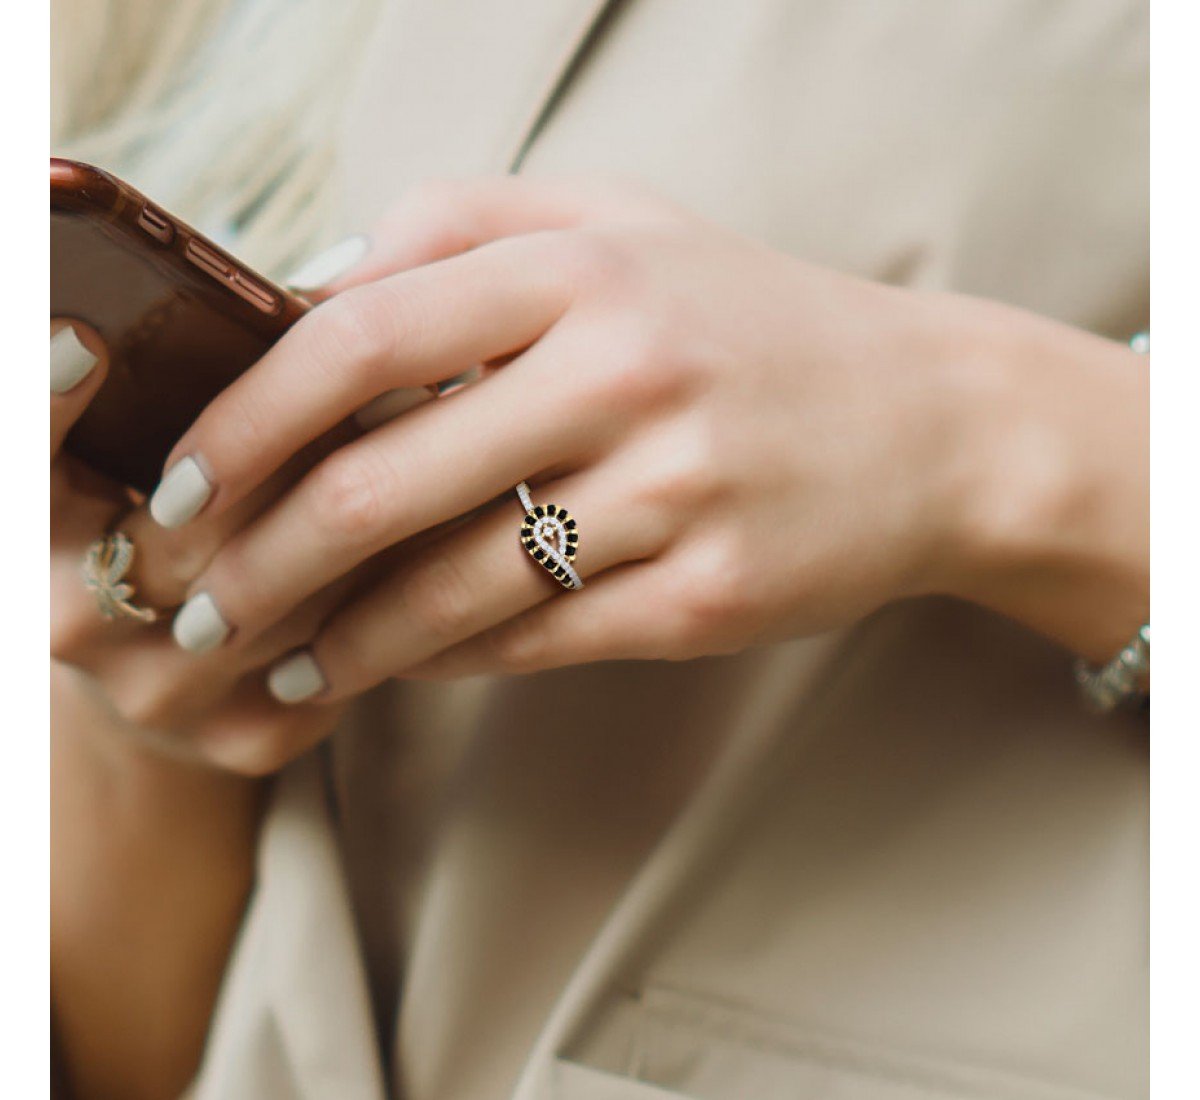 CaratLane Global - A Tanishq Partnership - Forever entwined, just like our  hearts. 💍💖 Featured here: Avni Mangalsutra Diamond Ring #CaratLaneUS  #caratlaneglobal #everydayjewelry #MangalsutraJewelry  #Mangalsutrajewelryinusa #mangalsutras #rings ...